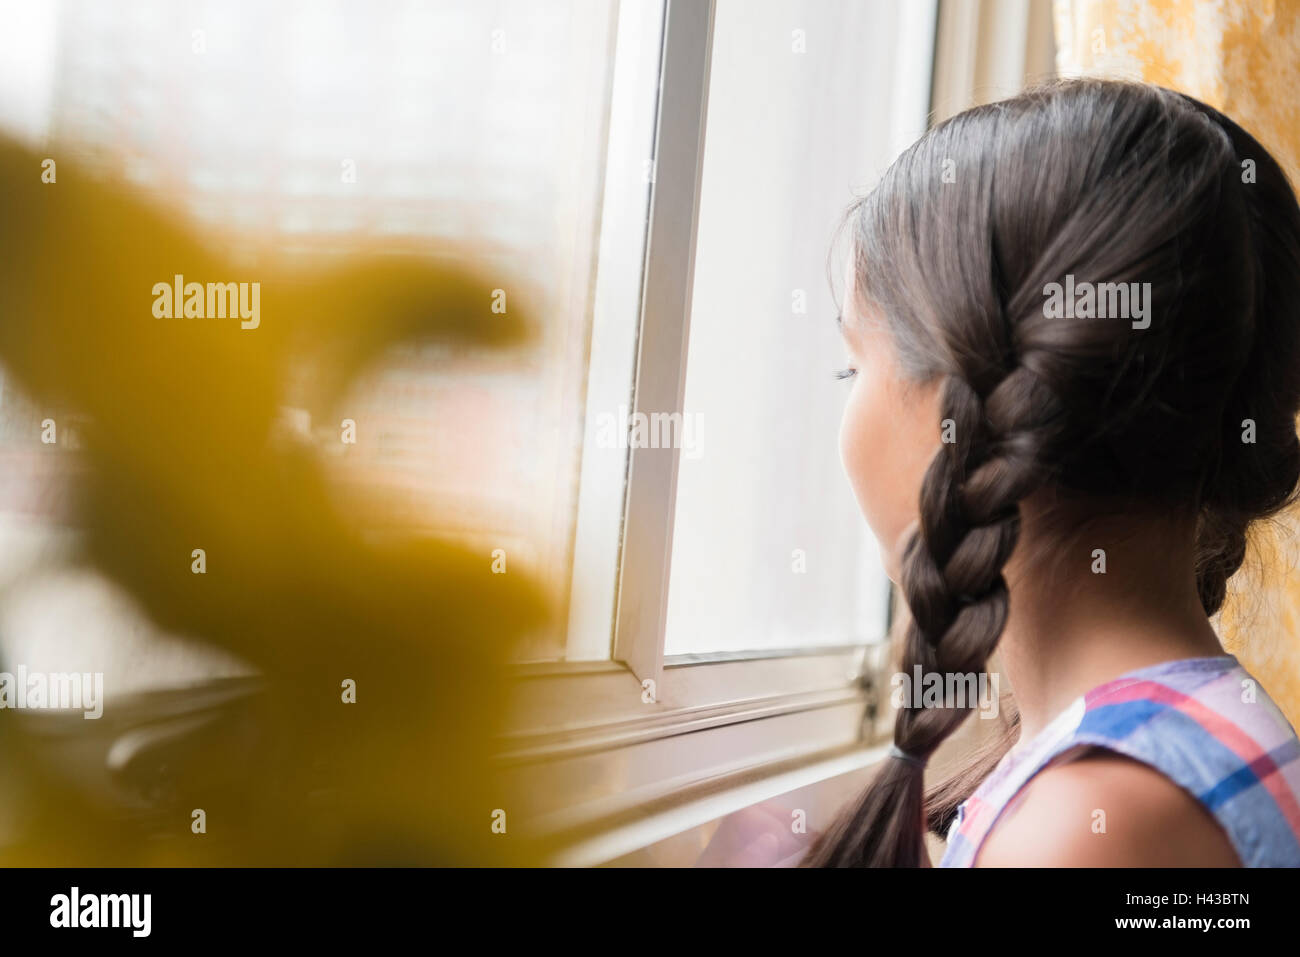 Mixed Race girl looking out window Banque D'Images